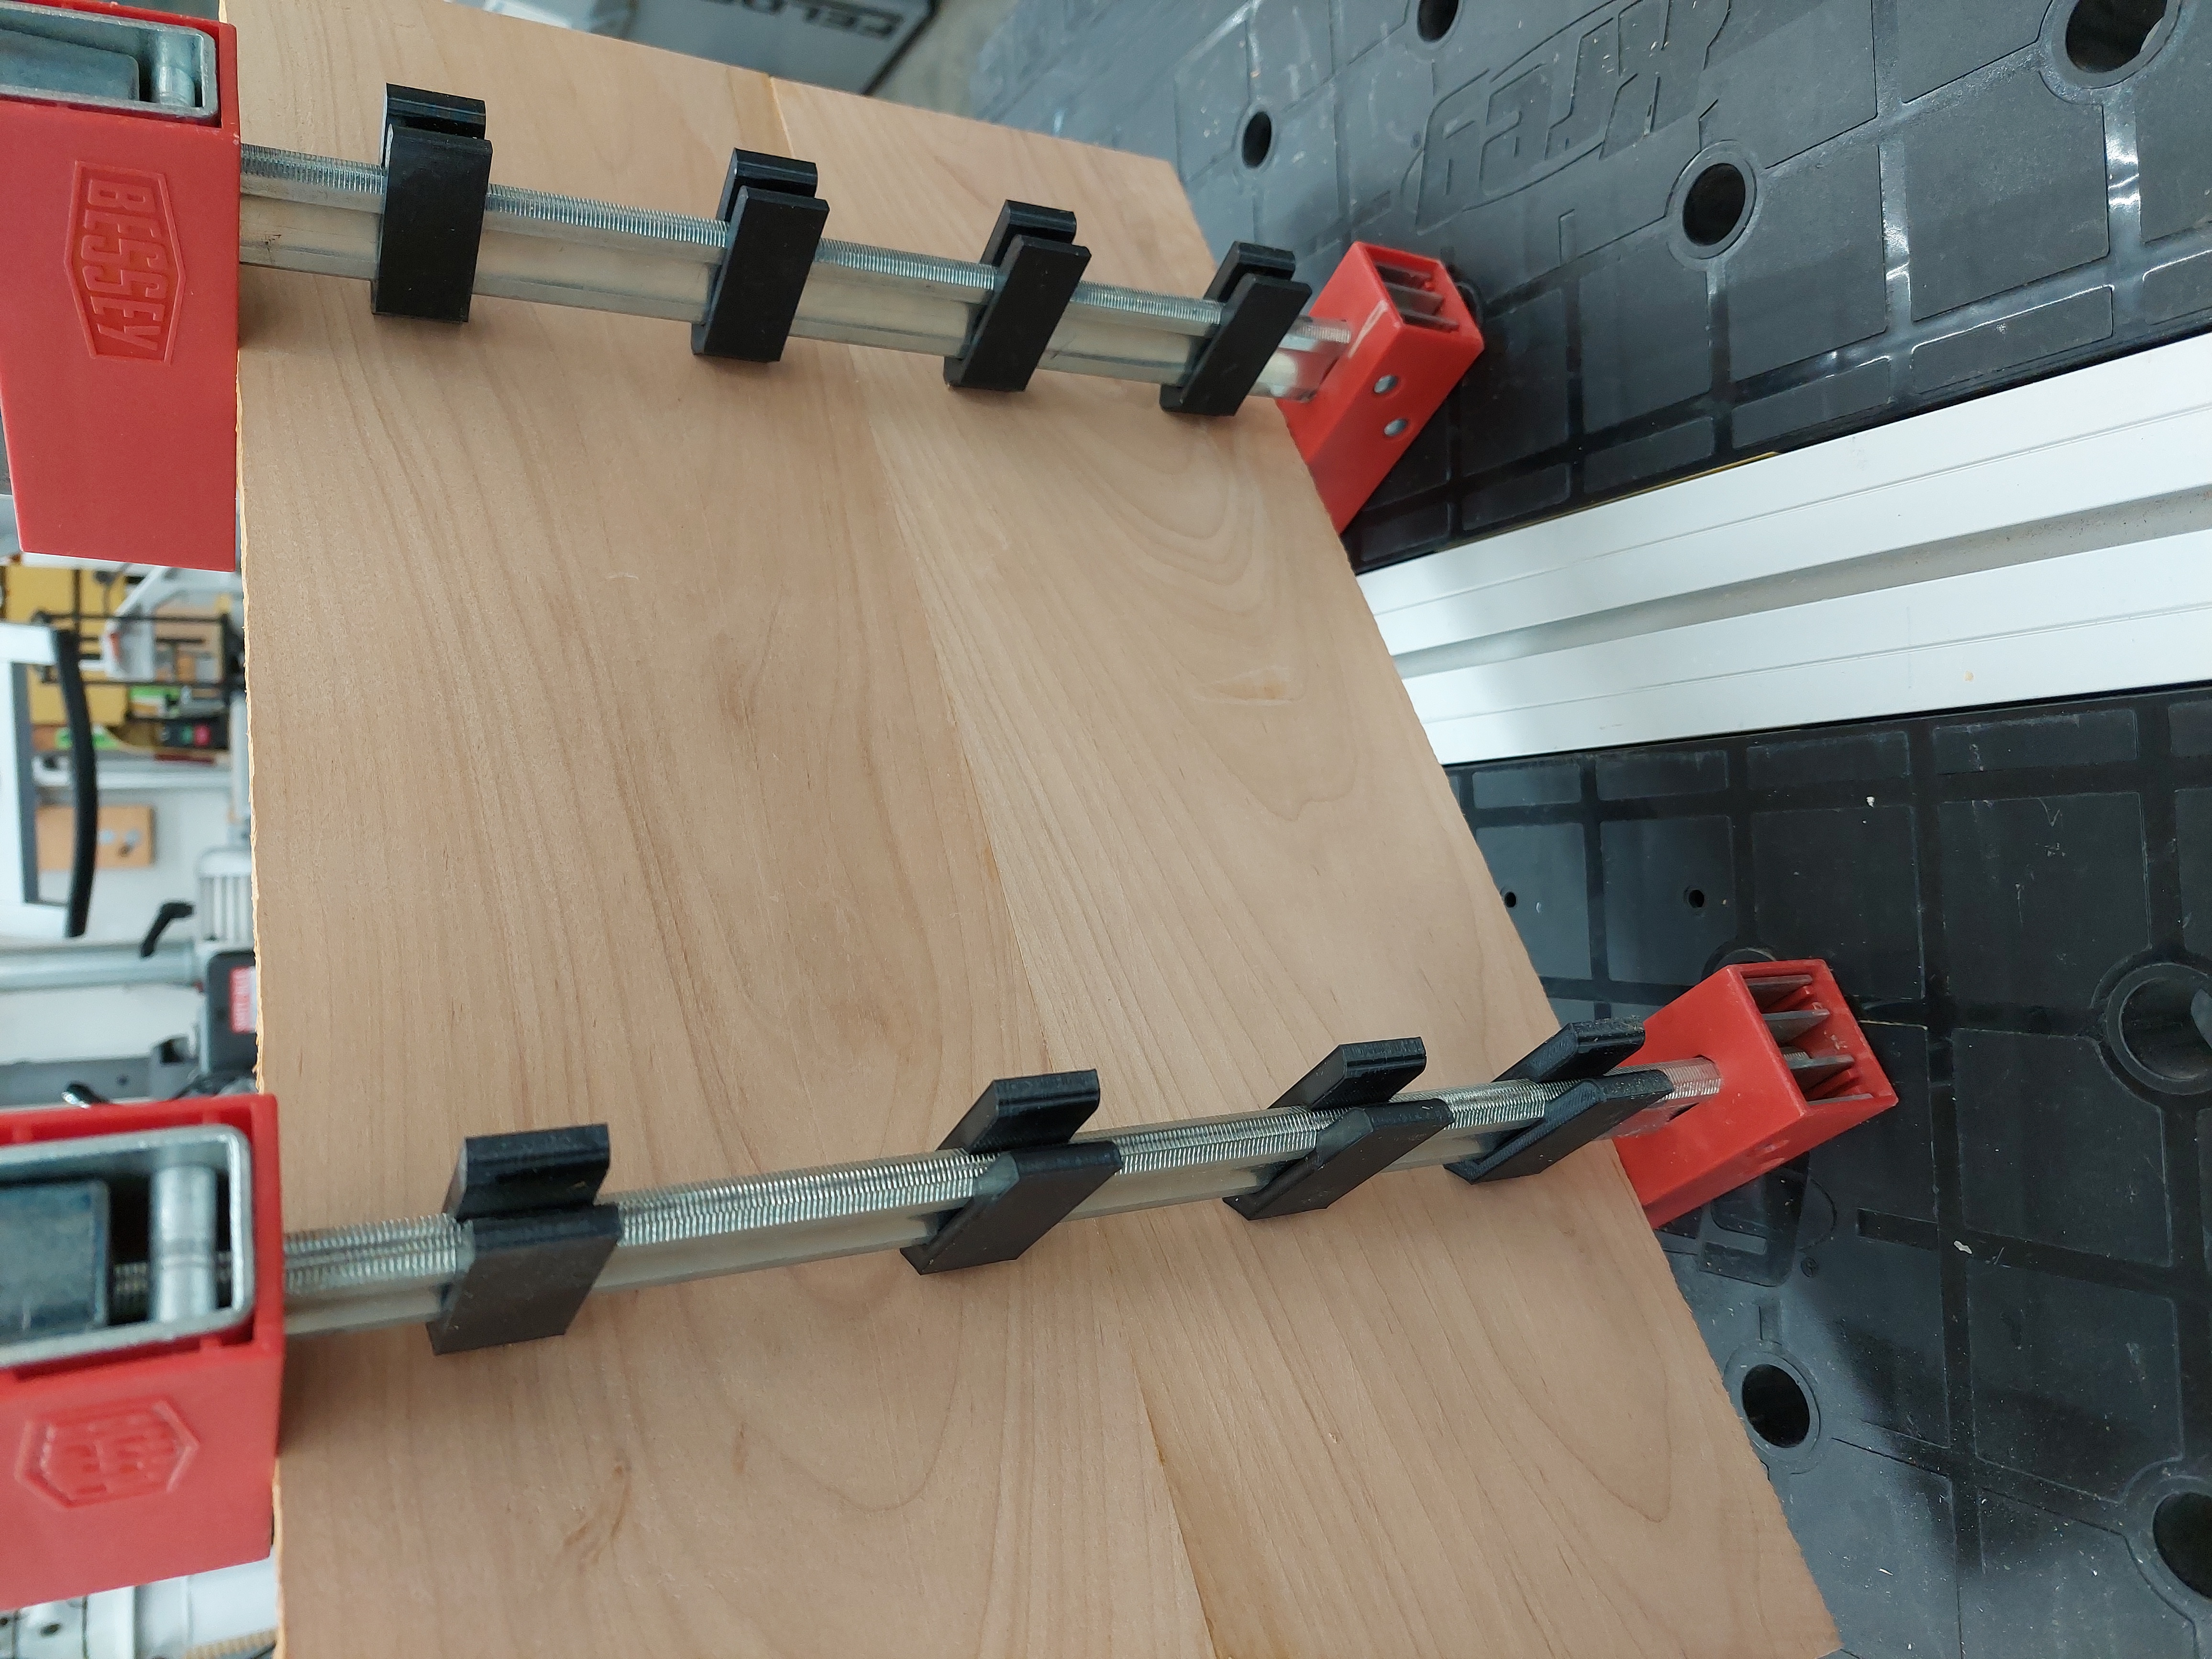 Clamp Saddles fit Bessey, Jet, and Gross Stabil parallel clamps